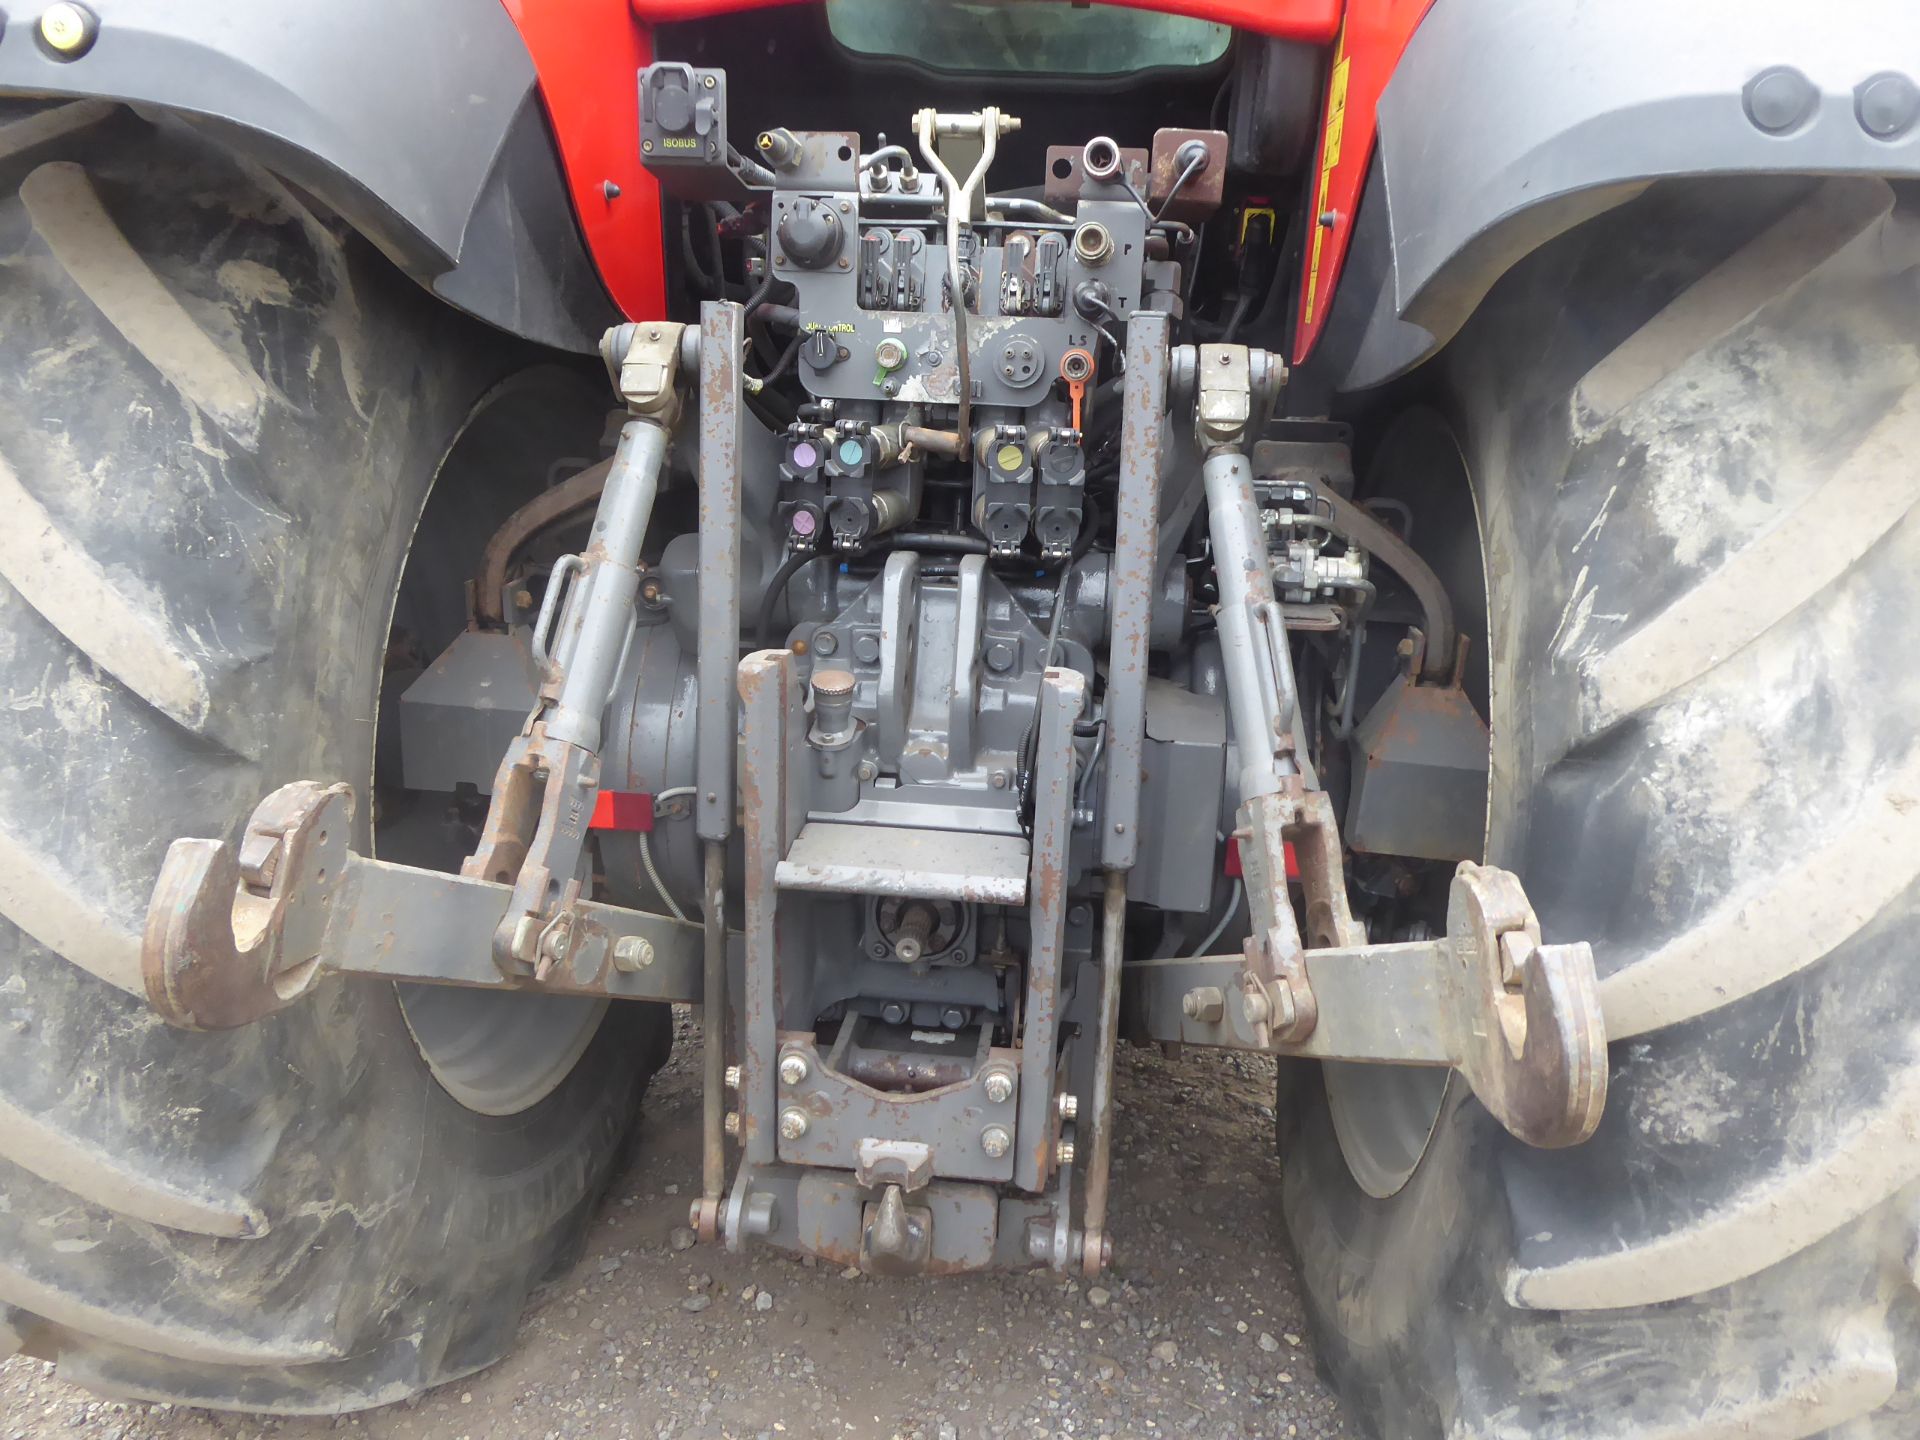 Massey Ferguson 7620 Exclusive 4wd tractor c/w VT gearbox, 150ltr/min hydraulic pump, 4T front - Image 4 of 5